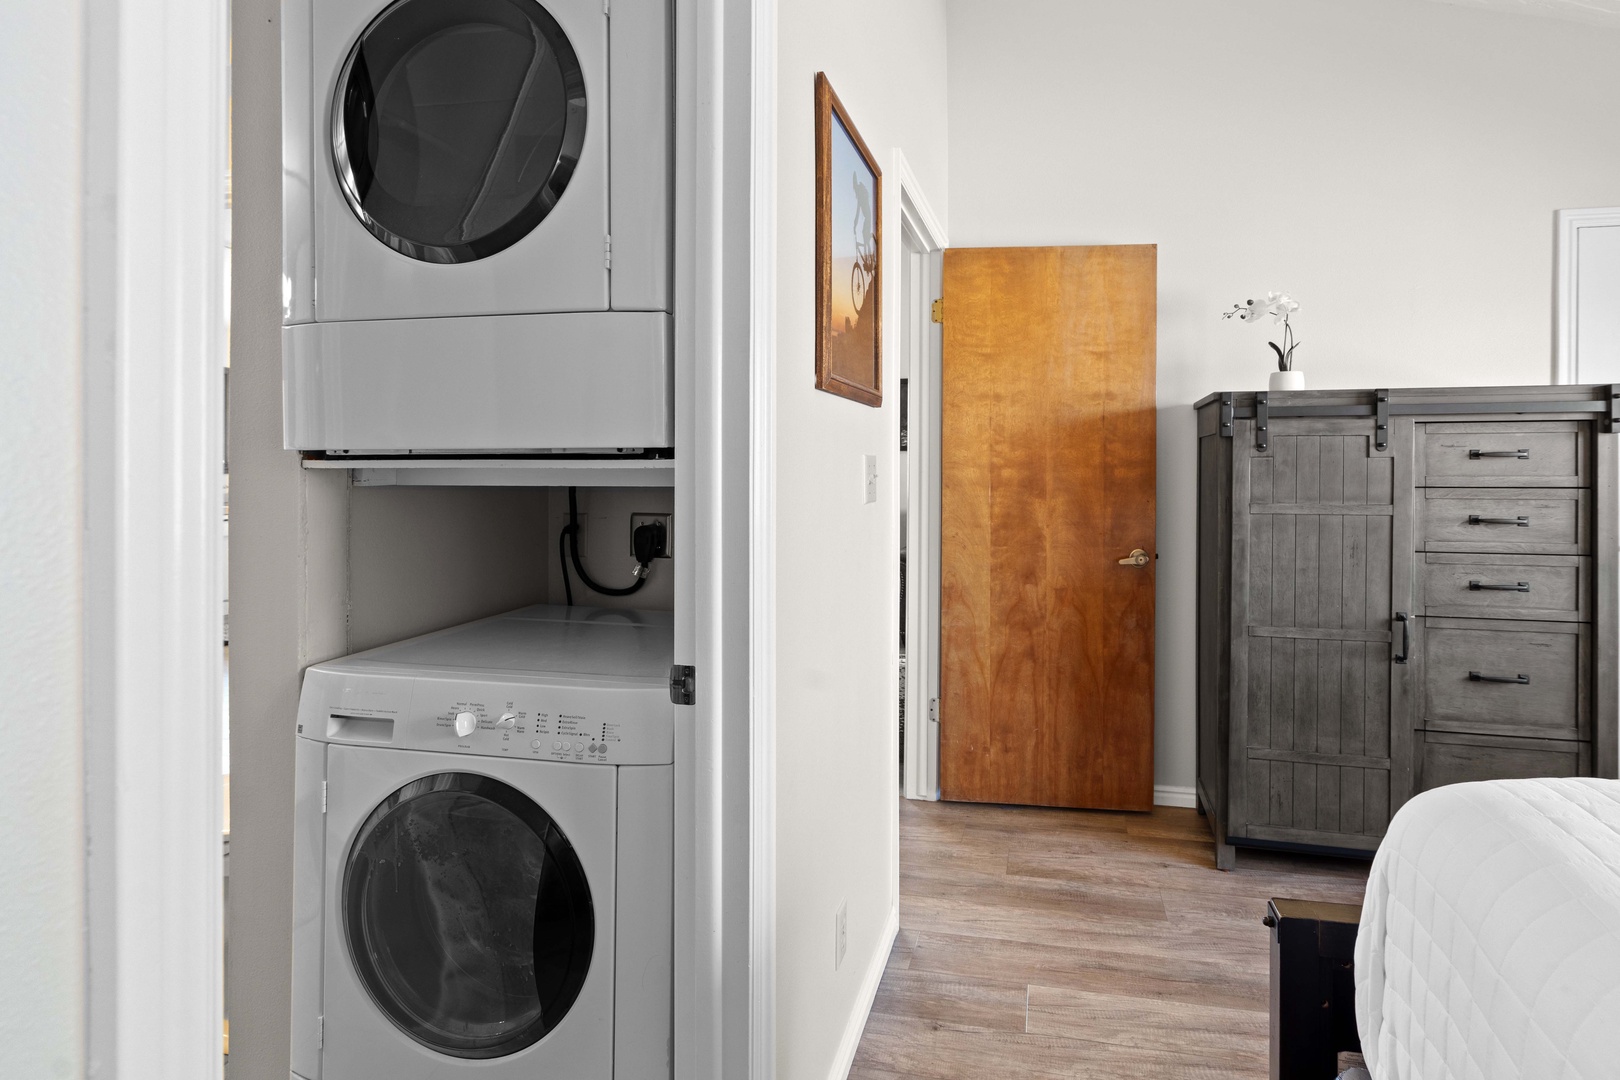 Private laundry is available for your stay, tucked away in the bathroom